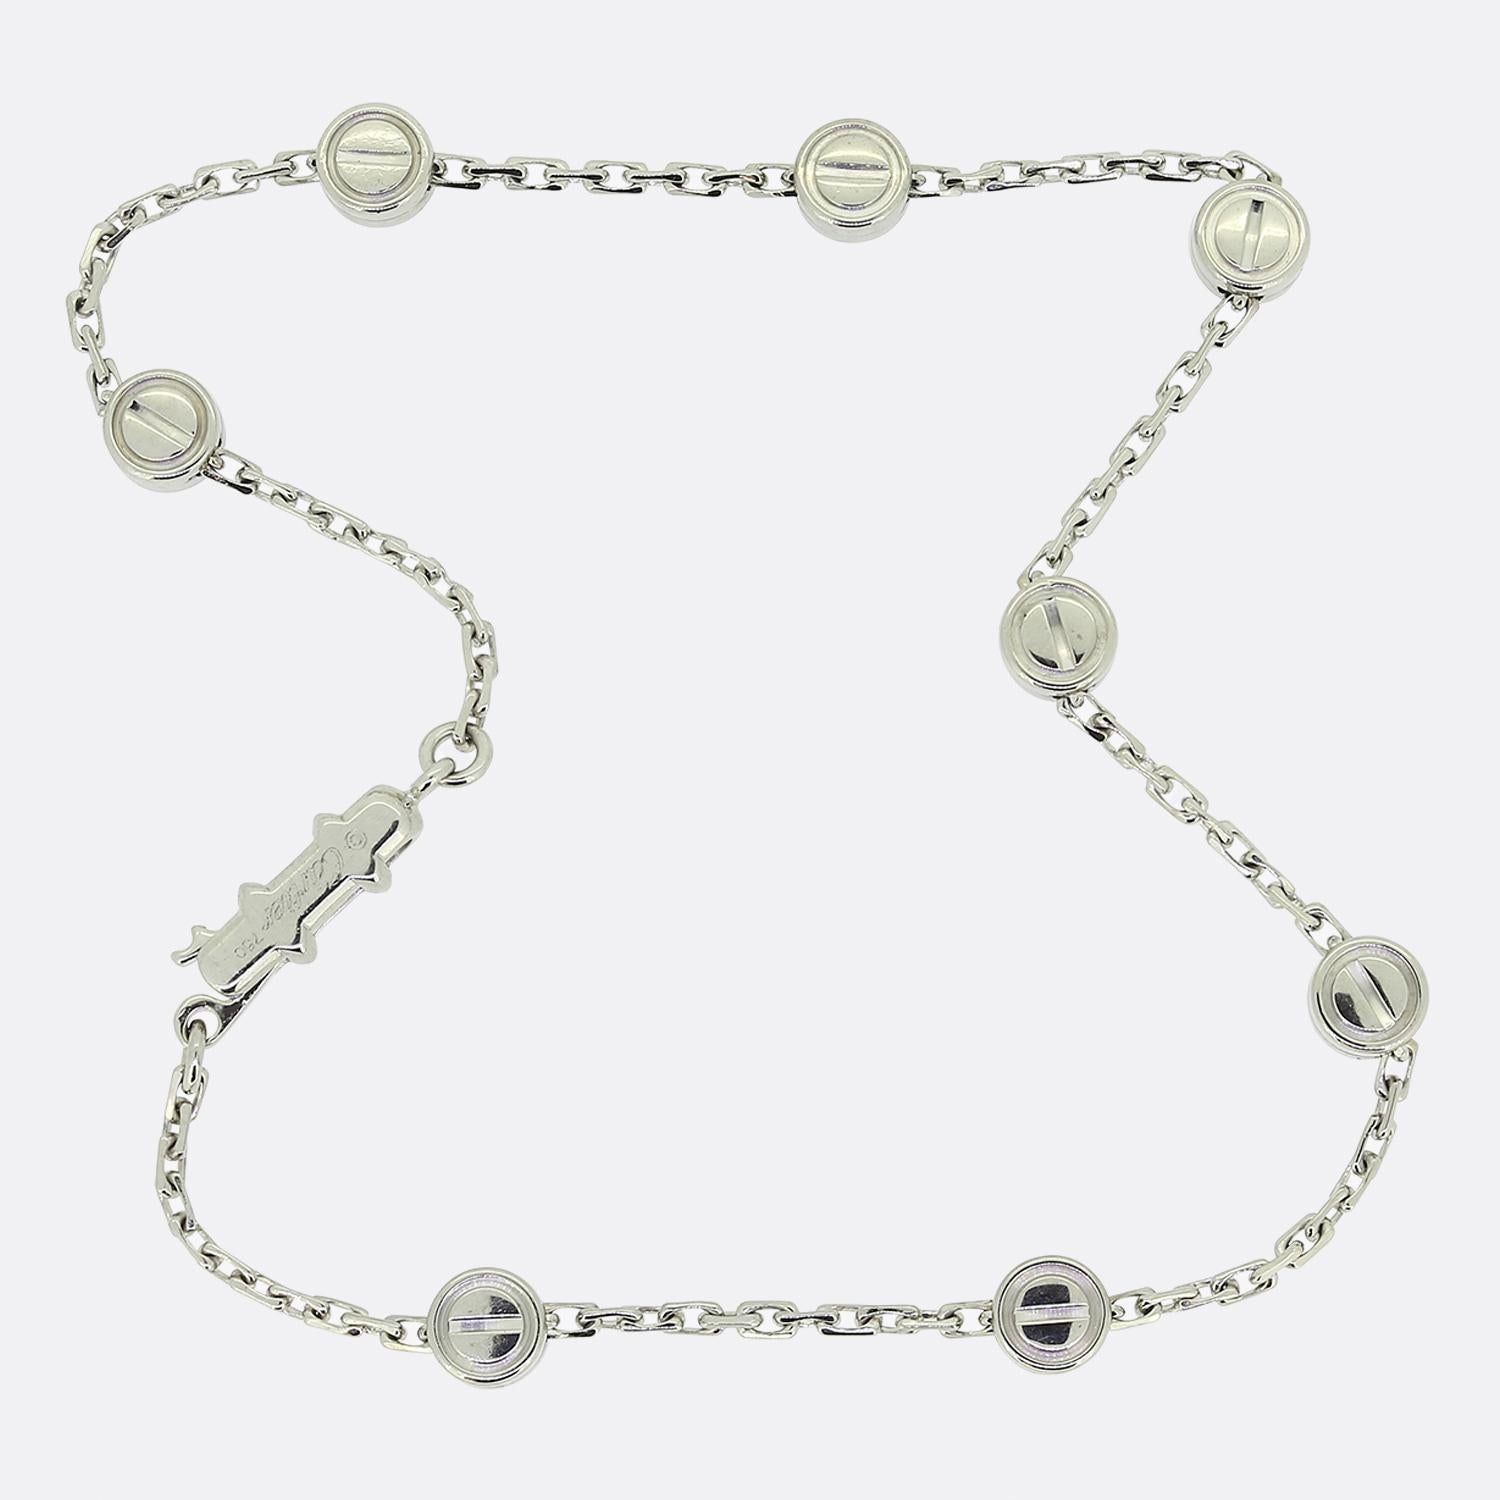 Here we have a lovely bracelet from the world renowned luxury jewellery house of Cartier. This piece has been crafted from 18ct white gold with a slim cable chain playing host to eight of Cartier's iconic screw motifs.

Condition: Used